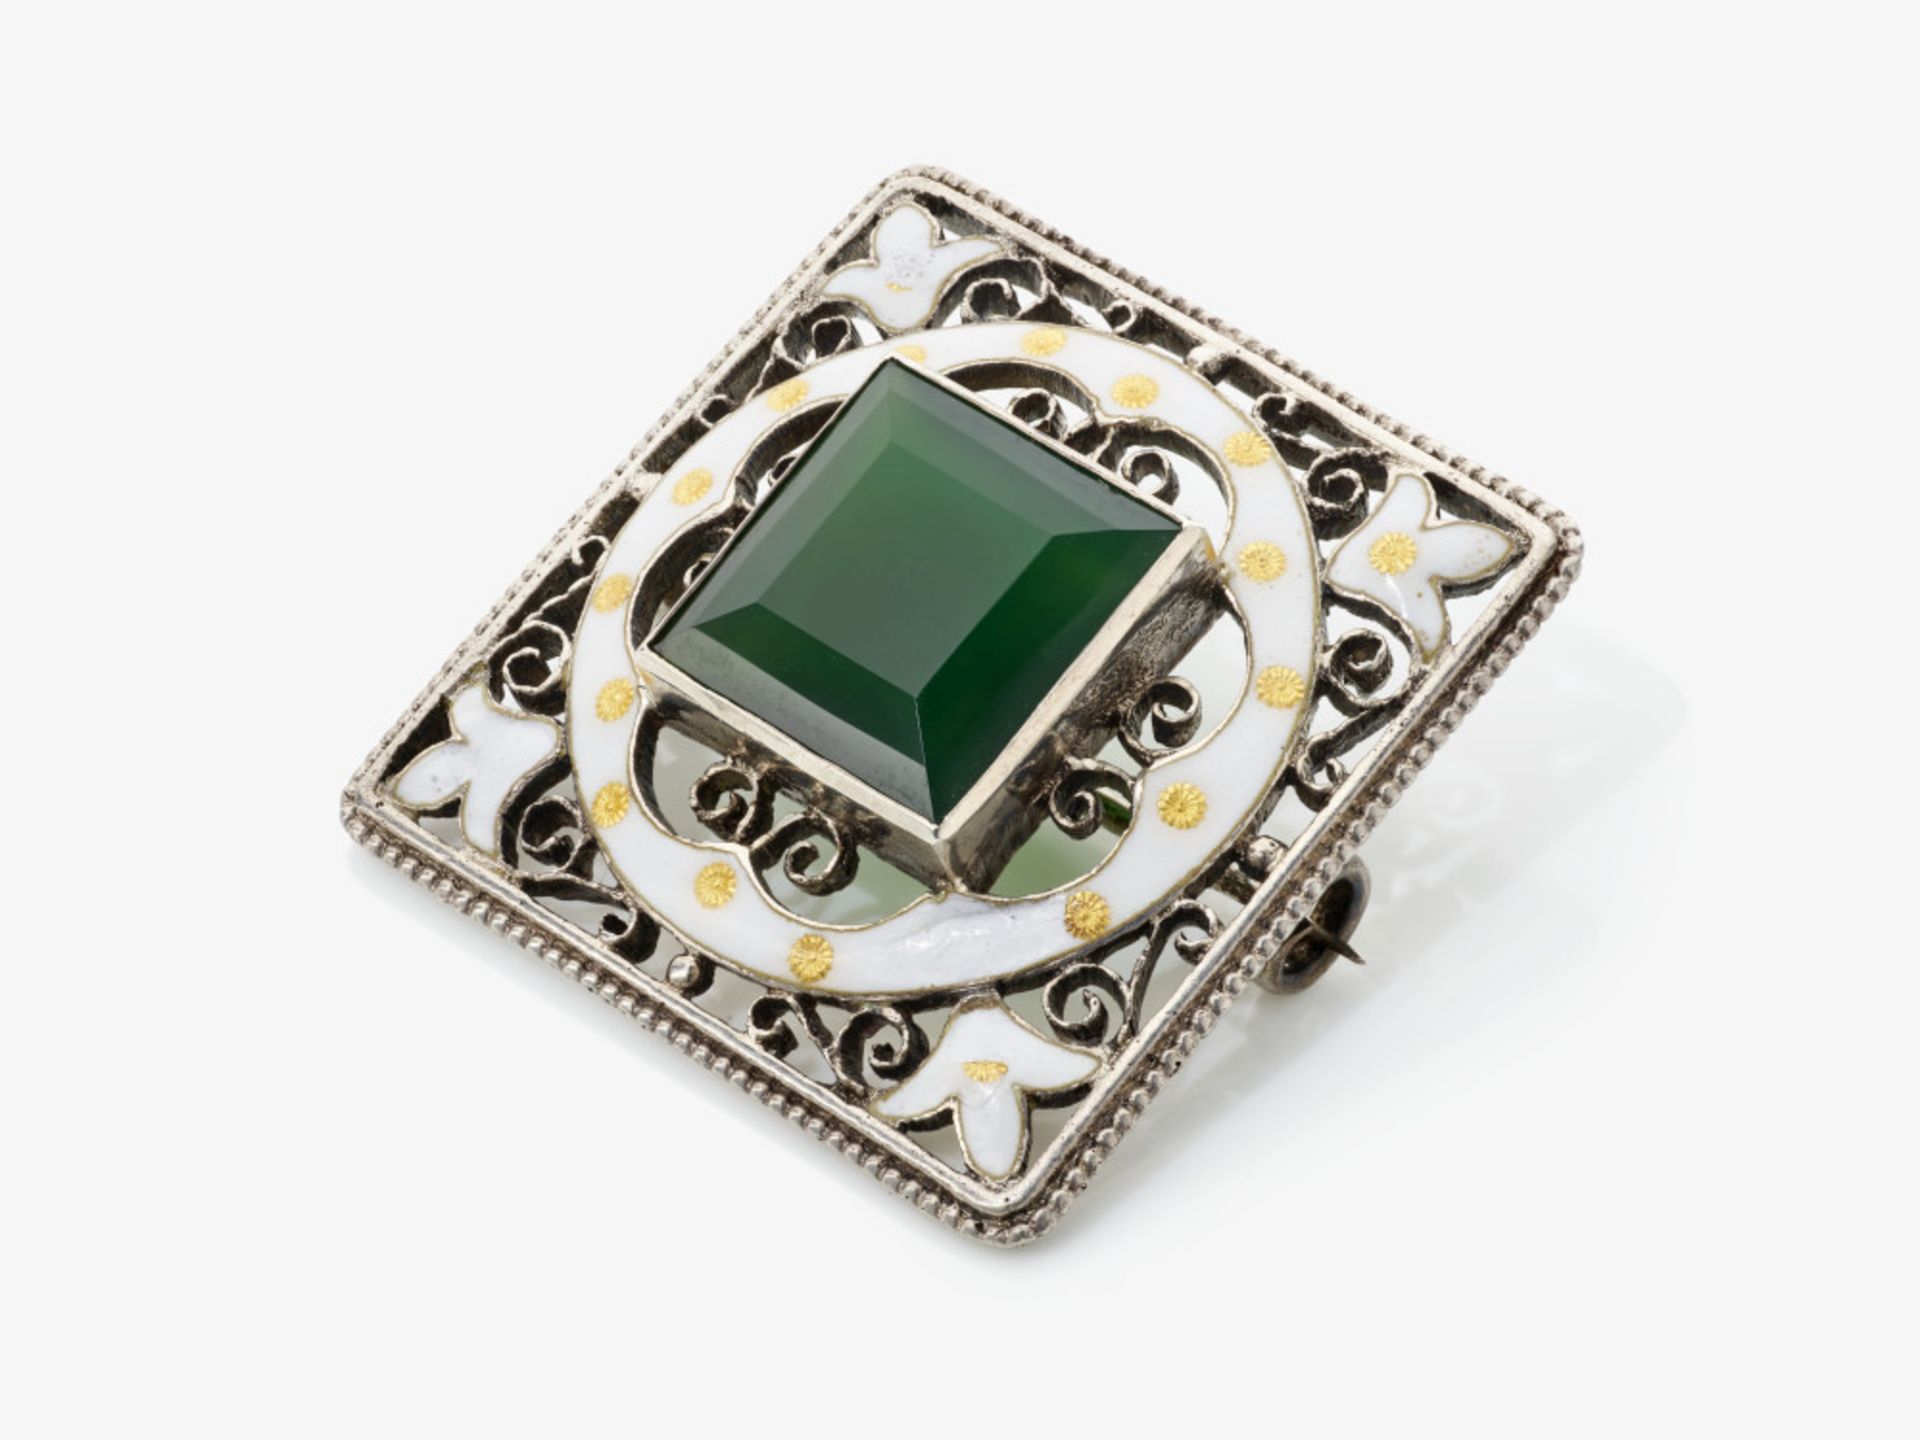 A brooch with green glass stone and white enamel